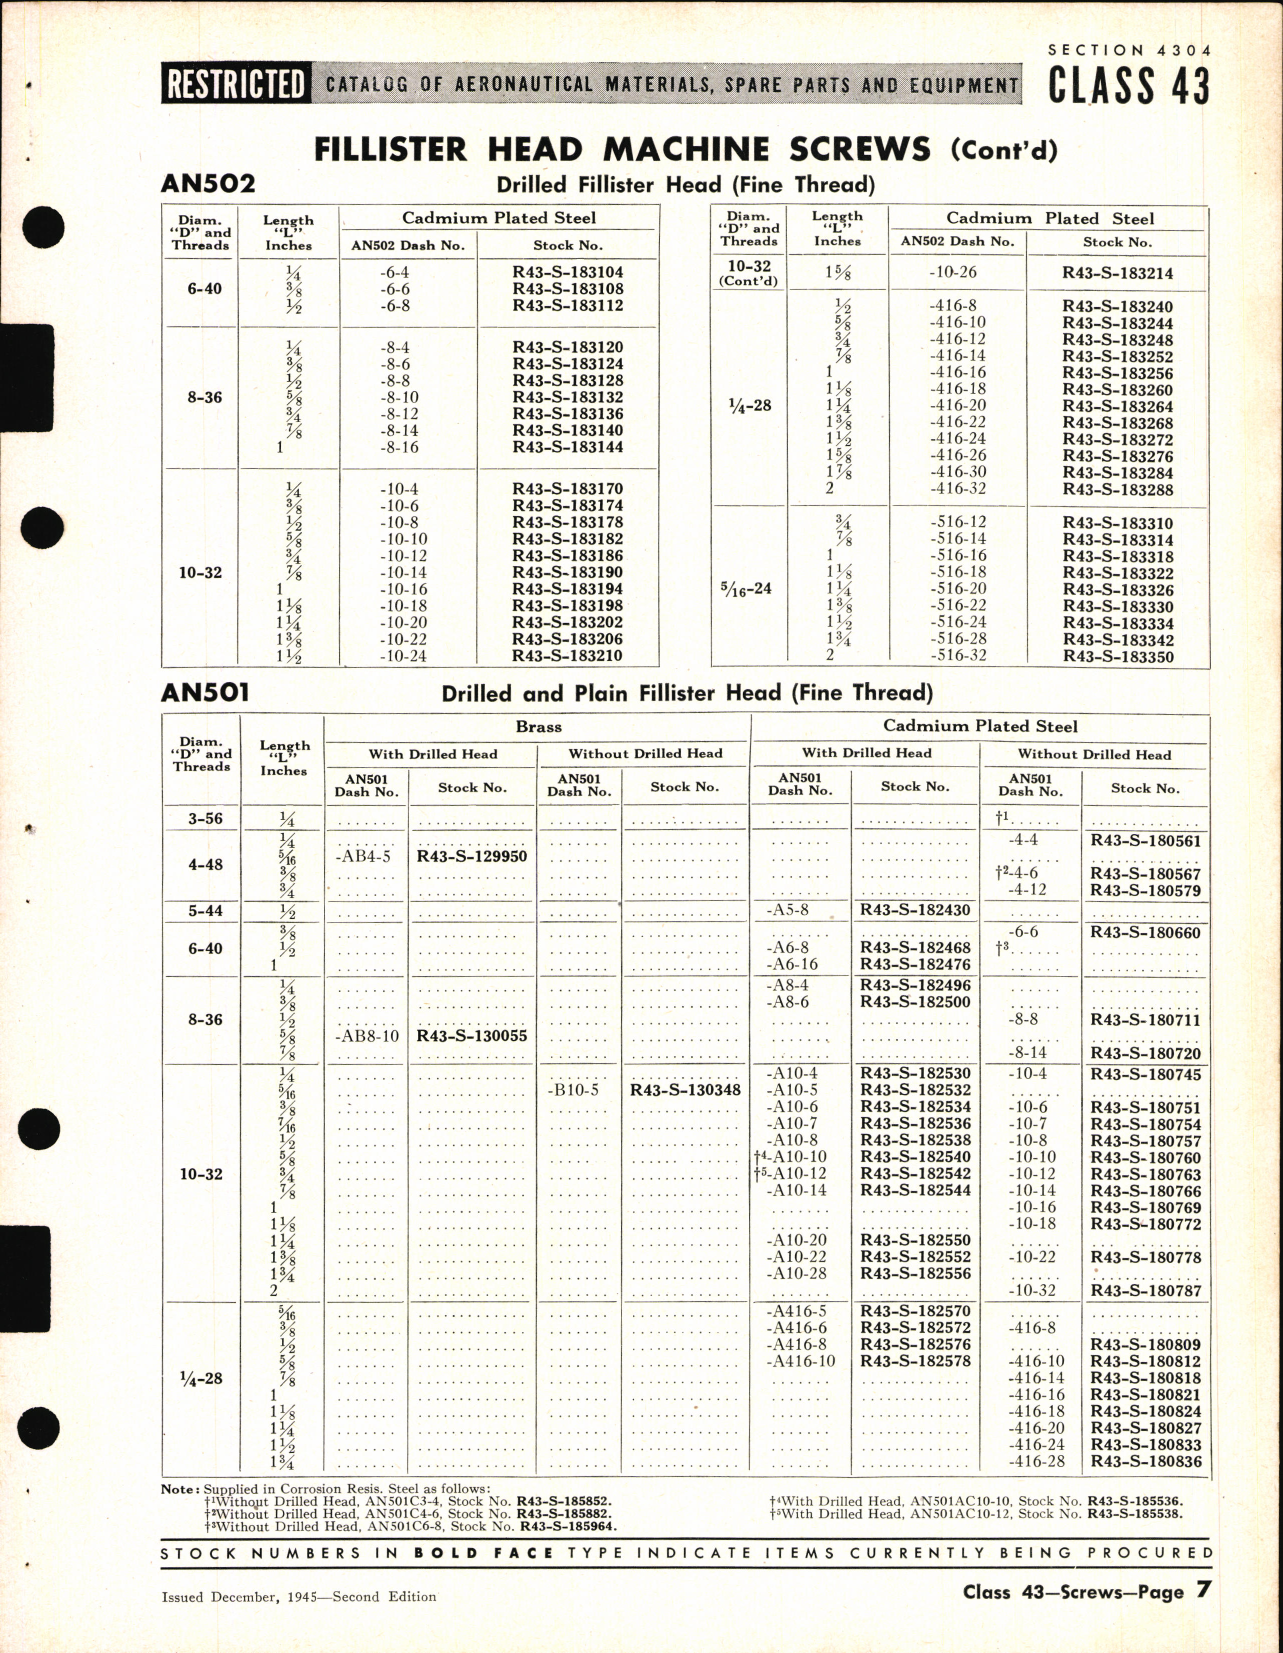 Sample page 7 from AirCorps Library document: Screws